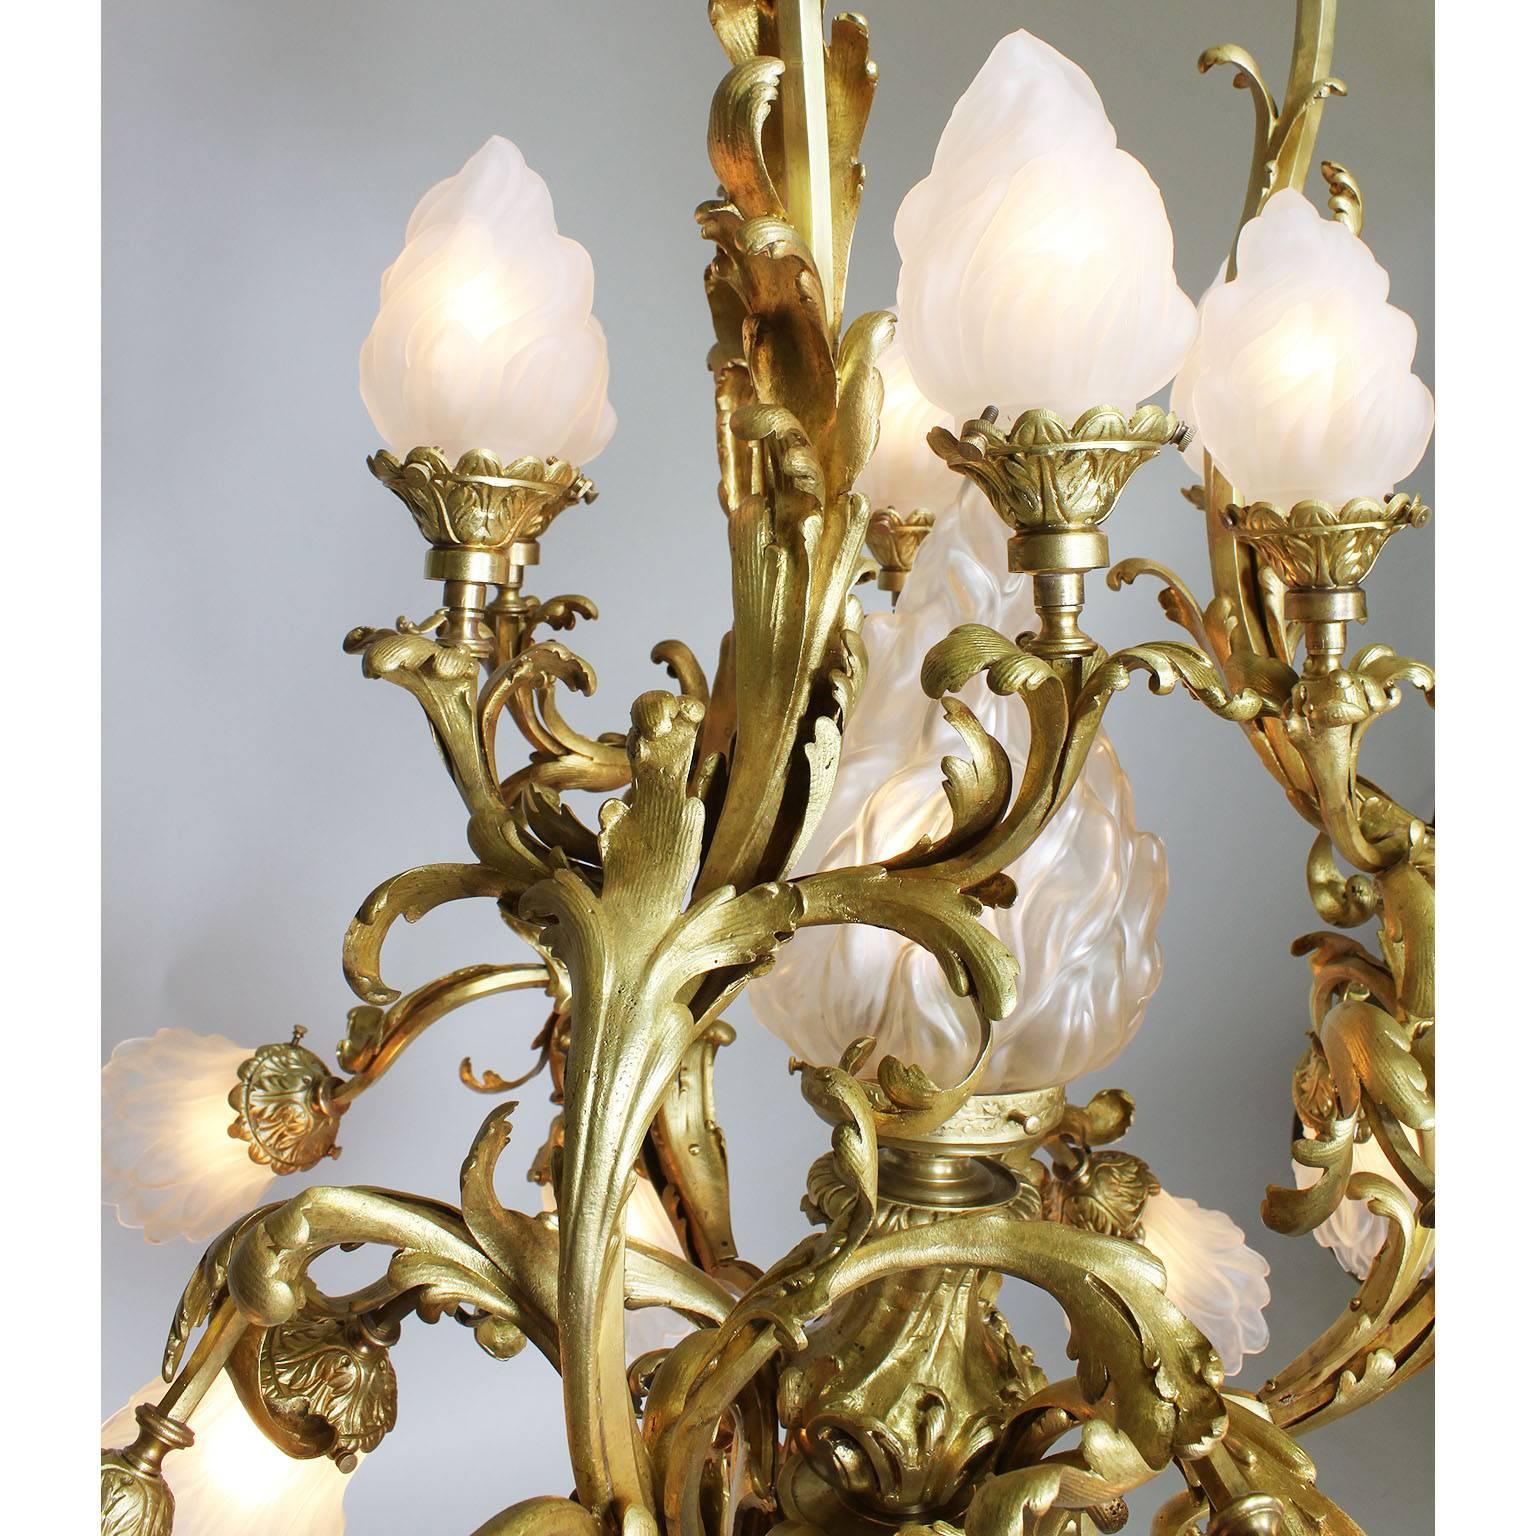 Early 20th Century French Belle Époque Rococo Style Gilt-Bronze and Frosted Glass Shades Chandelier For Sale